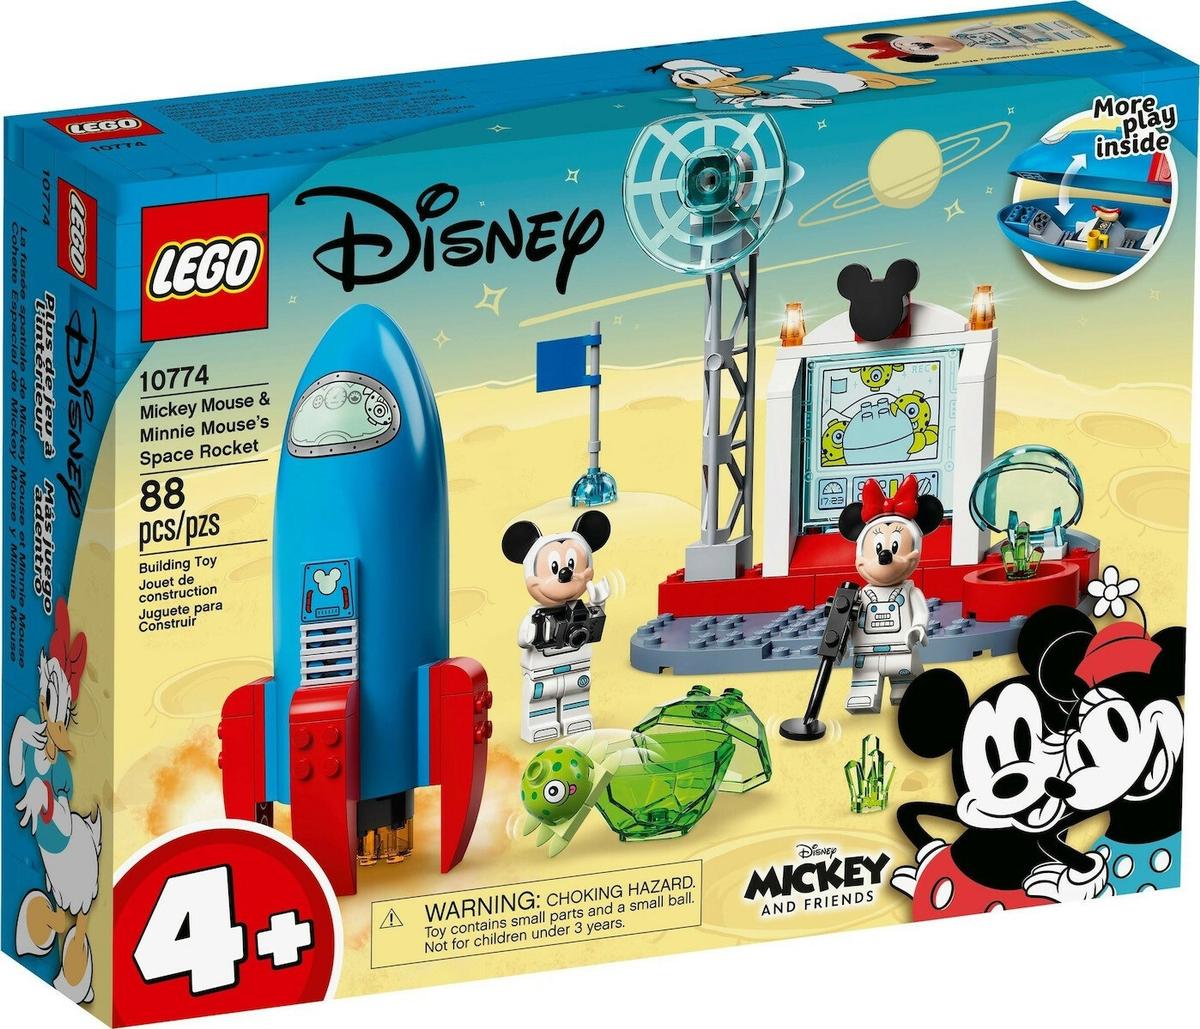 Lego Disney: Mickey Mouse & Minnie Mouse's Space Rocket